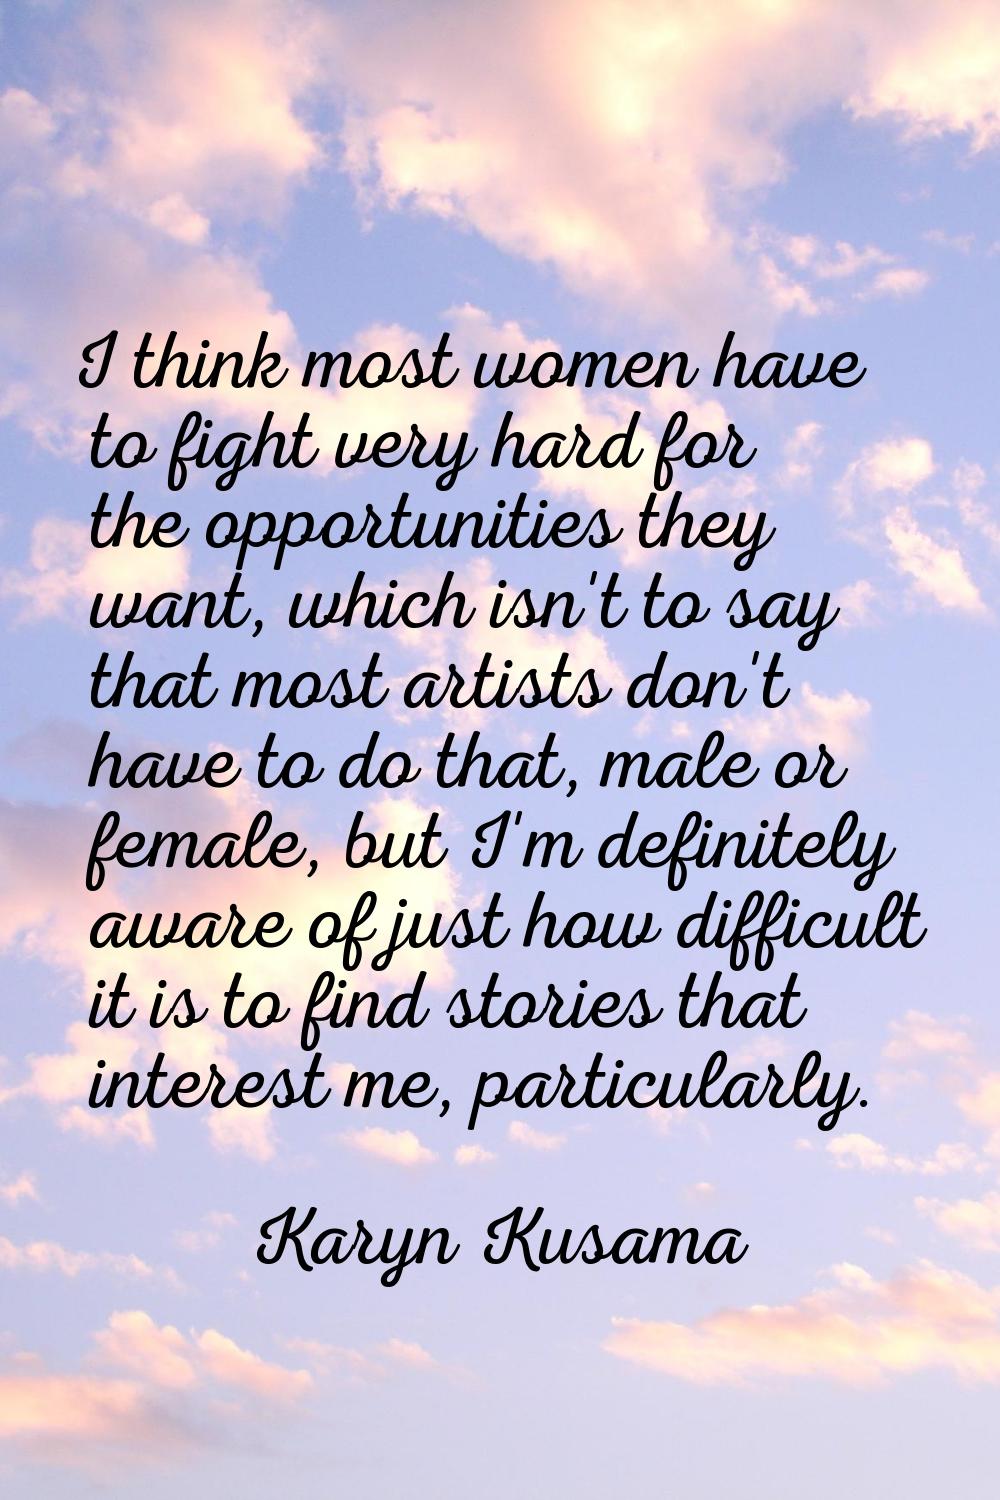 I think most women have to fight very hard for the opportunities they want, which isn't to say that